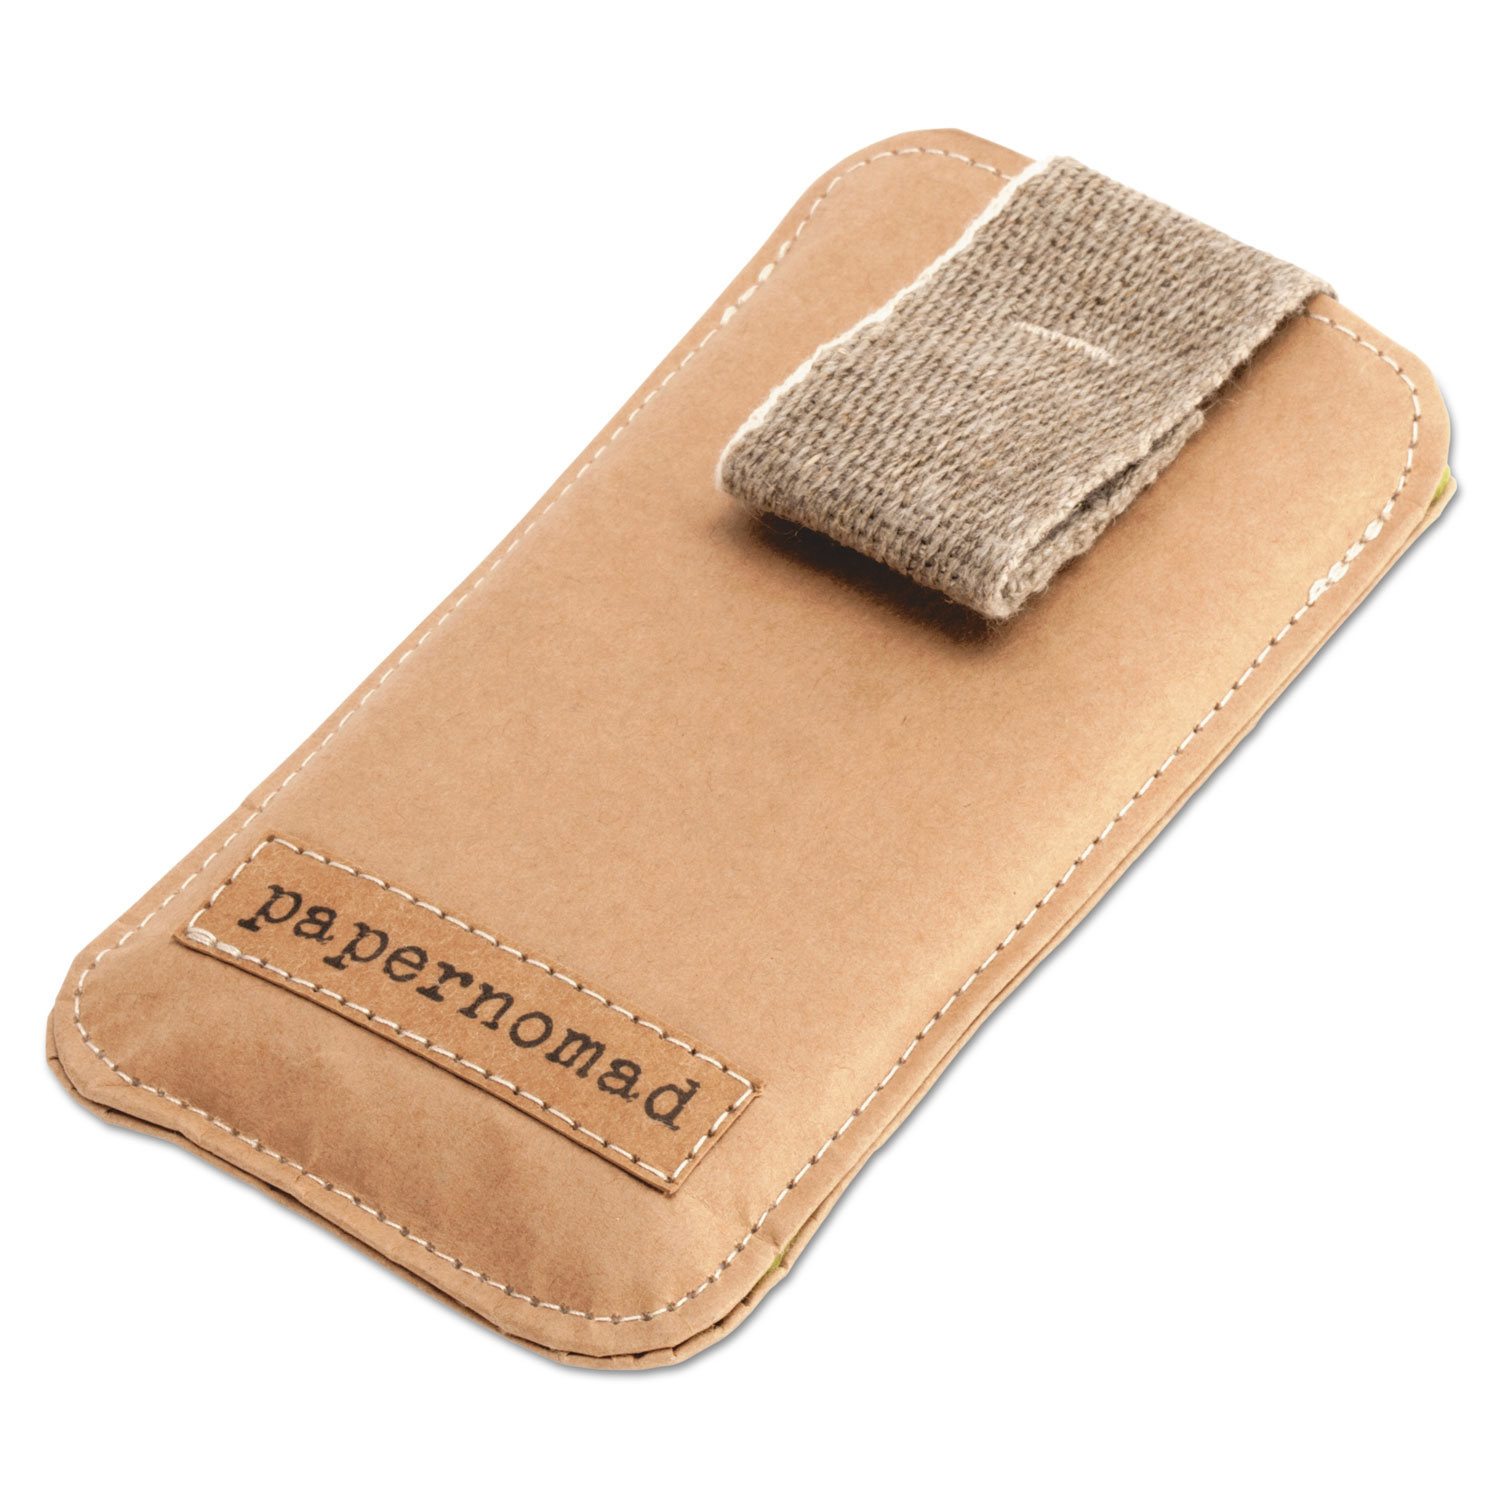 Papernomad Pars Sleeve for iPhone 5/5c/5s, Beige